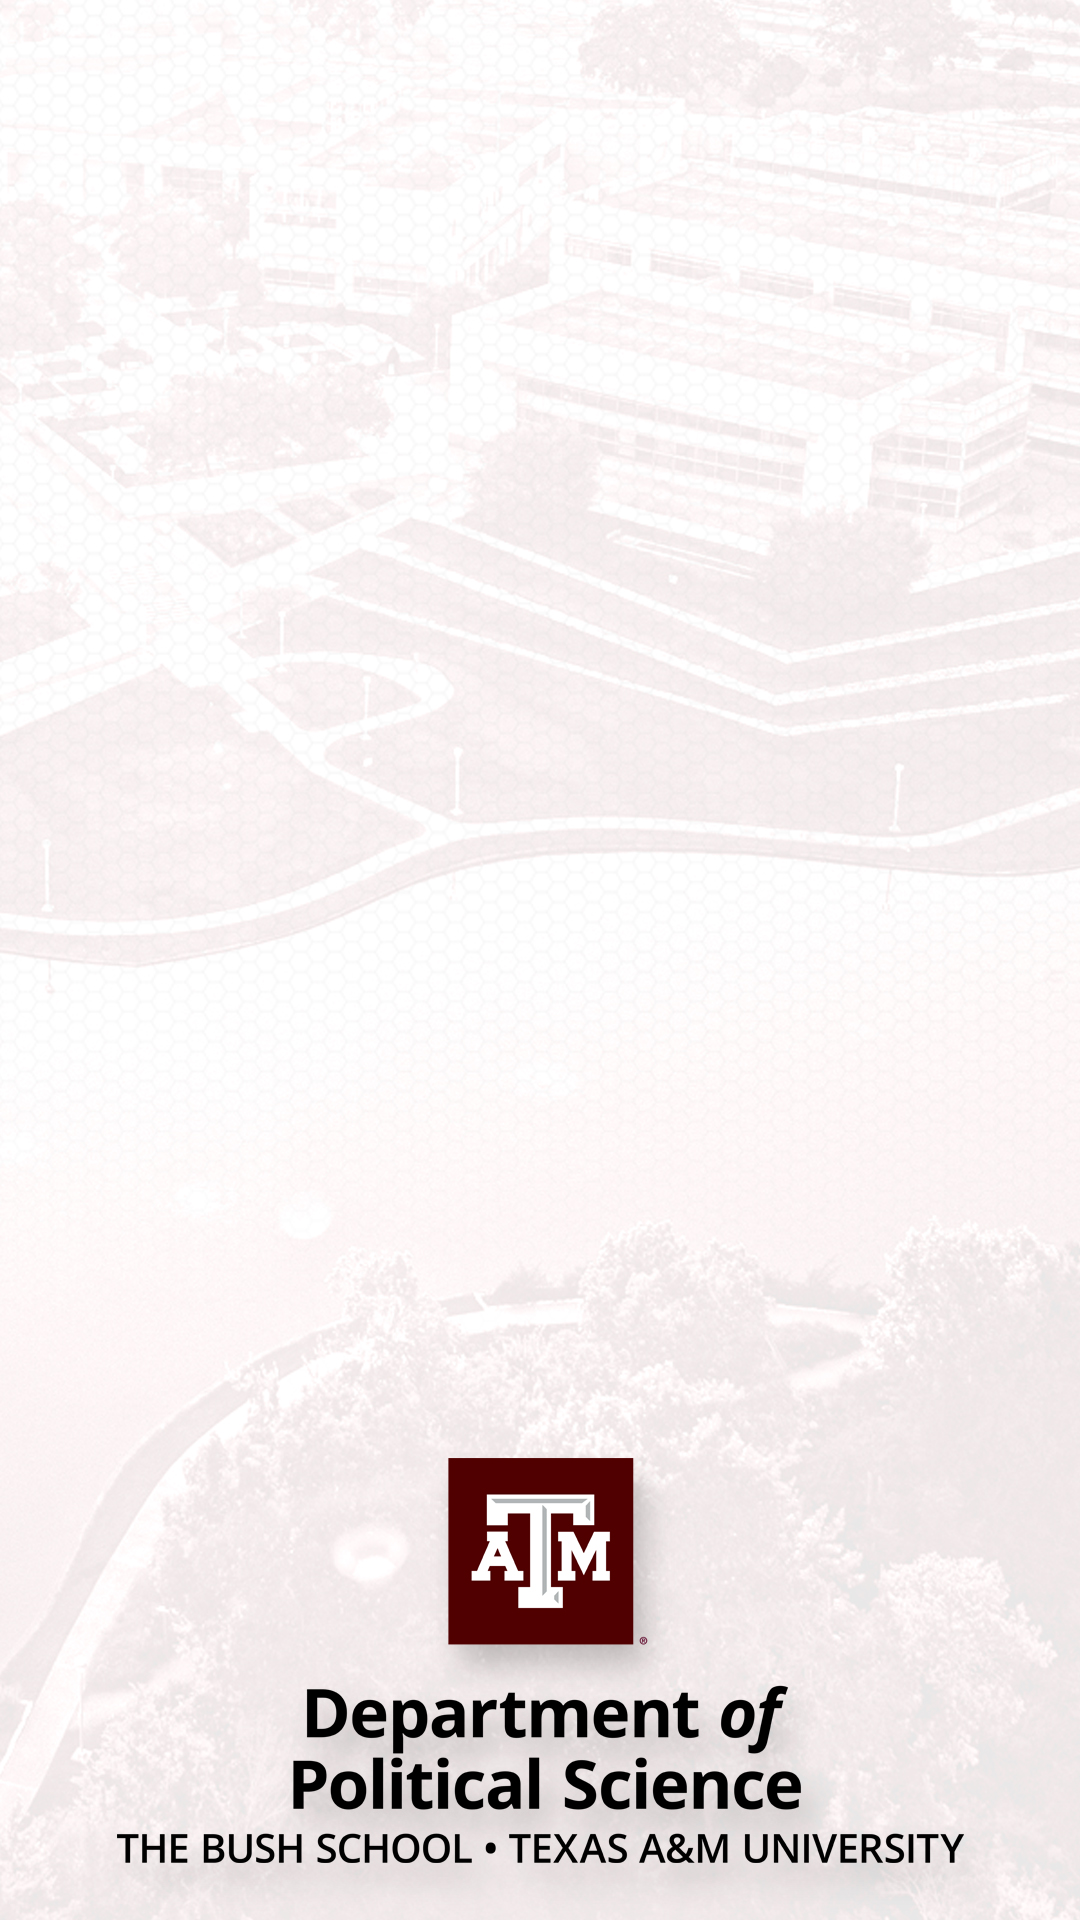 Background - Phone: Department of Political Science